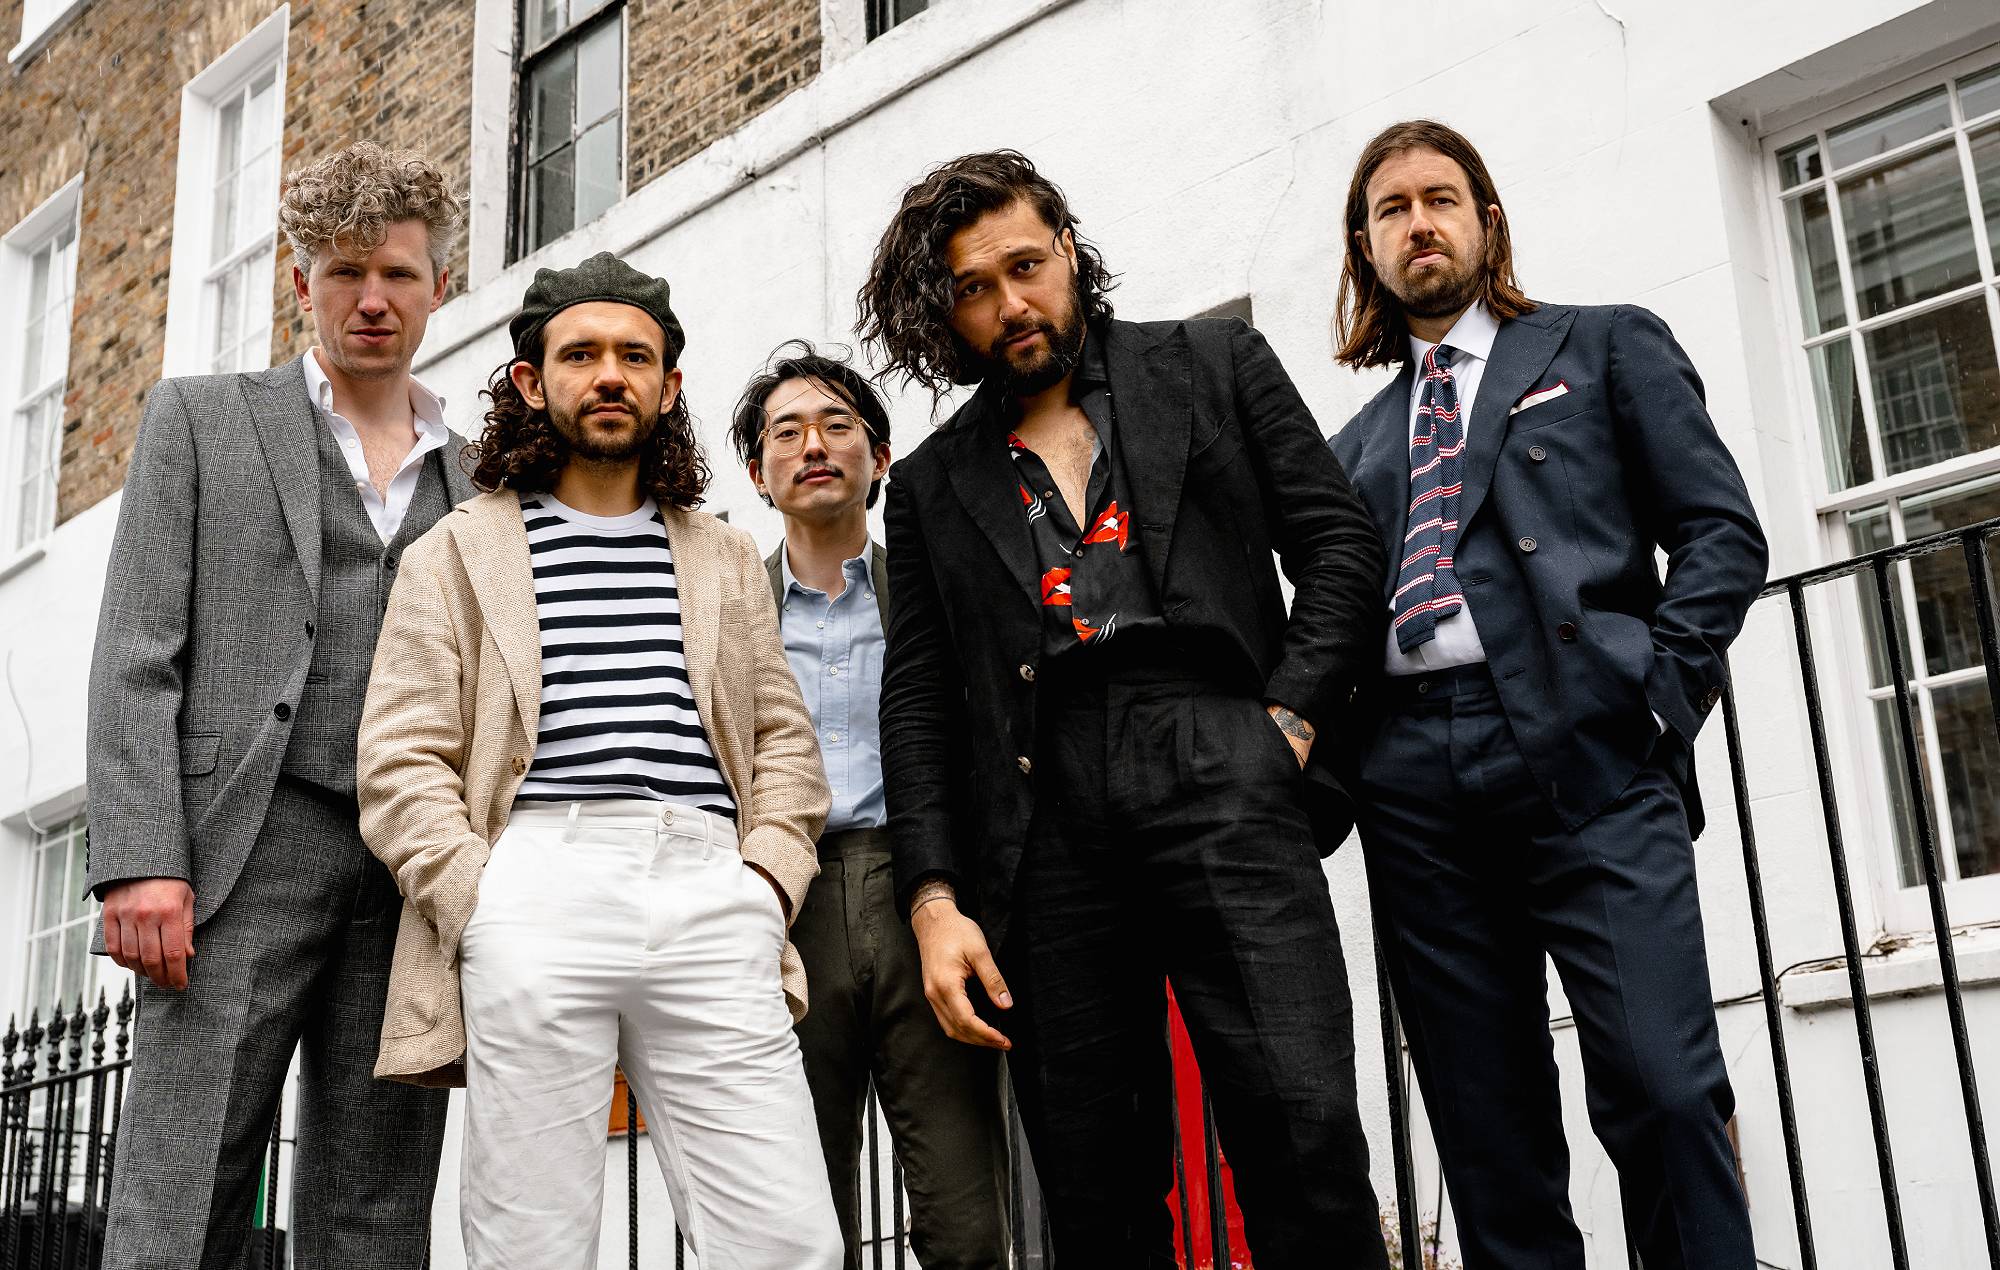 Gang Of Youths on ‘The Angel Of 8th Ave.’: “It’s a reflection of love in a new city”